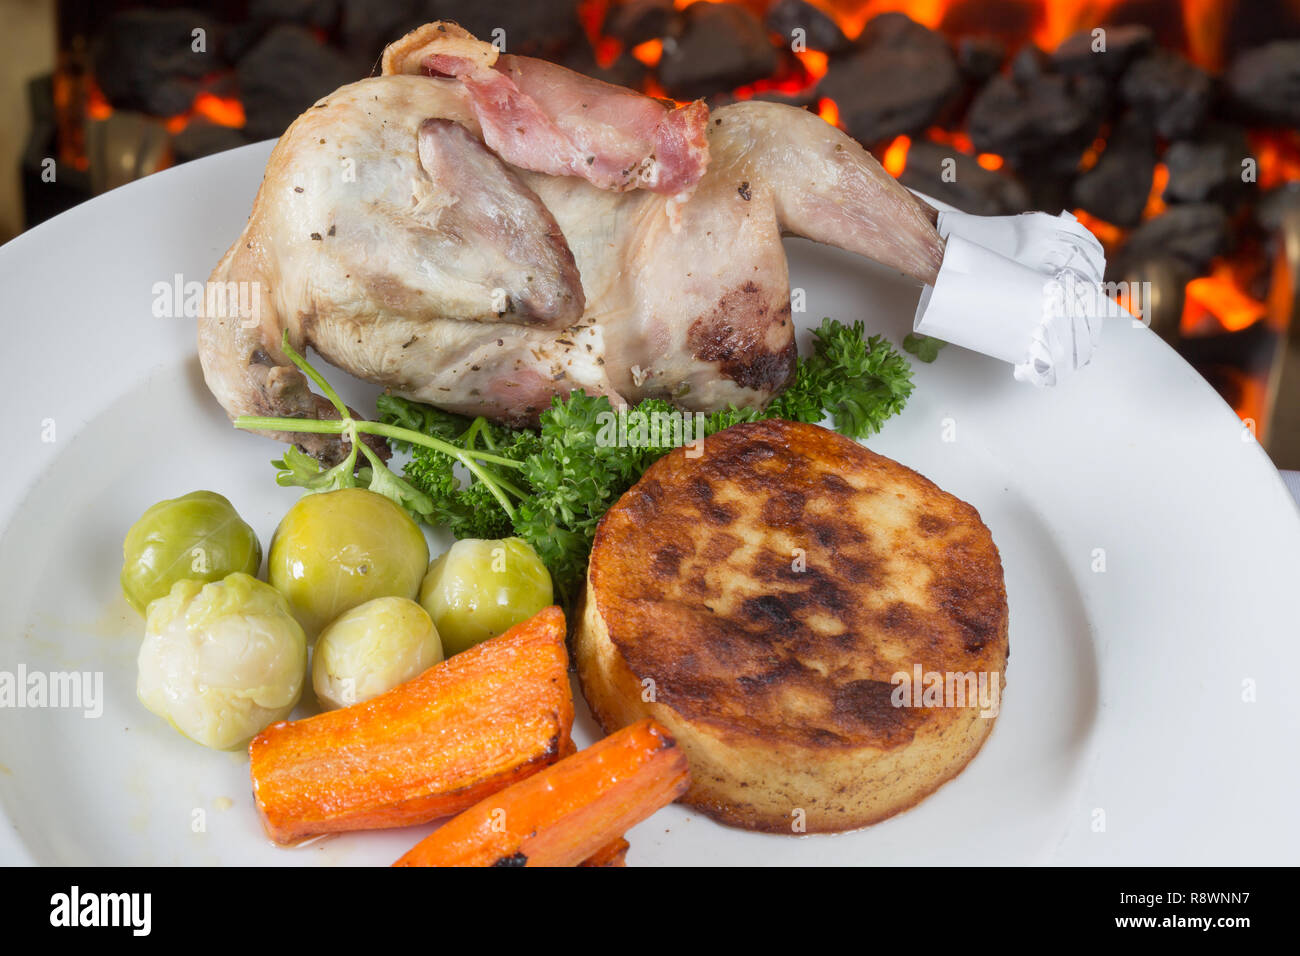 Whole Quail wrapped in Bacon and oven roasted, served with Fondant potato and vegetables. Stock Photo